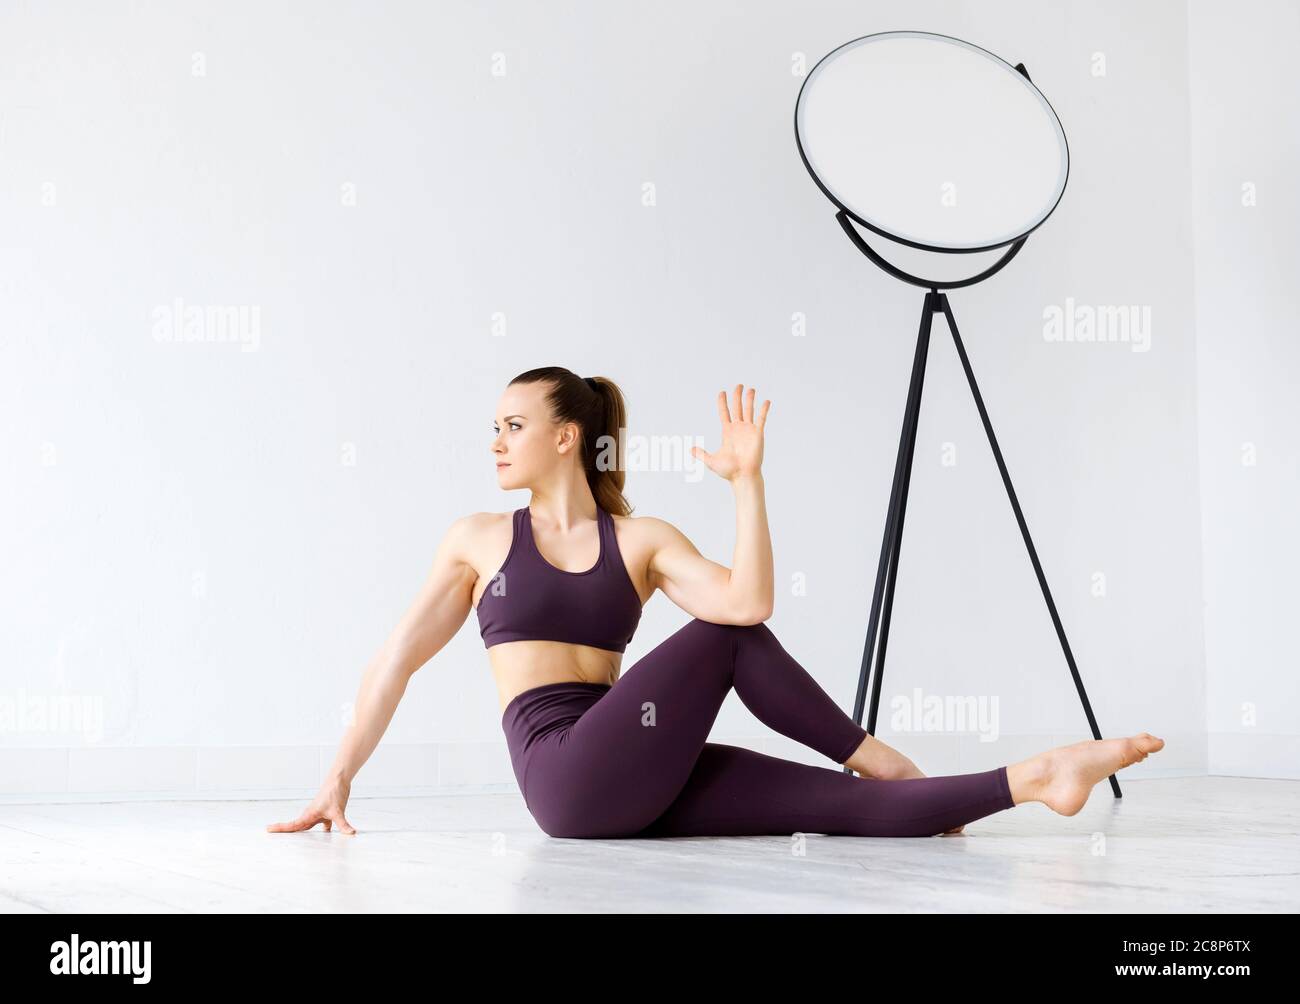 https://c8.alamy.com/comp/2C8P6TX/athletic-young-woman-doing-twist-stretching-exercises-on-the-floor-in-a-high-key-gym-in-a-health-and-fitness-concept-to-tone-her-lower-back-muscles-2C8P6TX.jpg